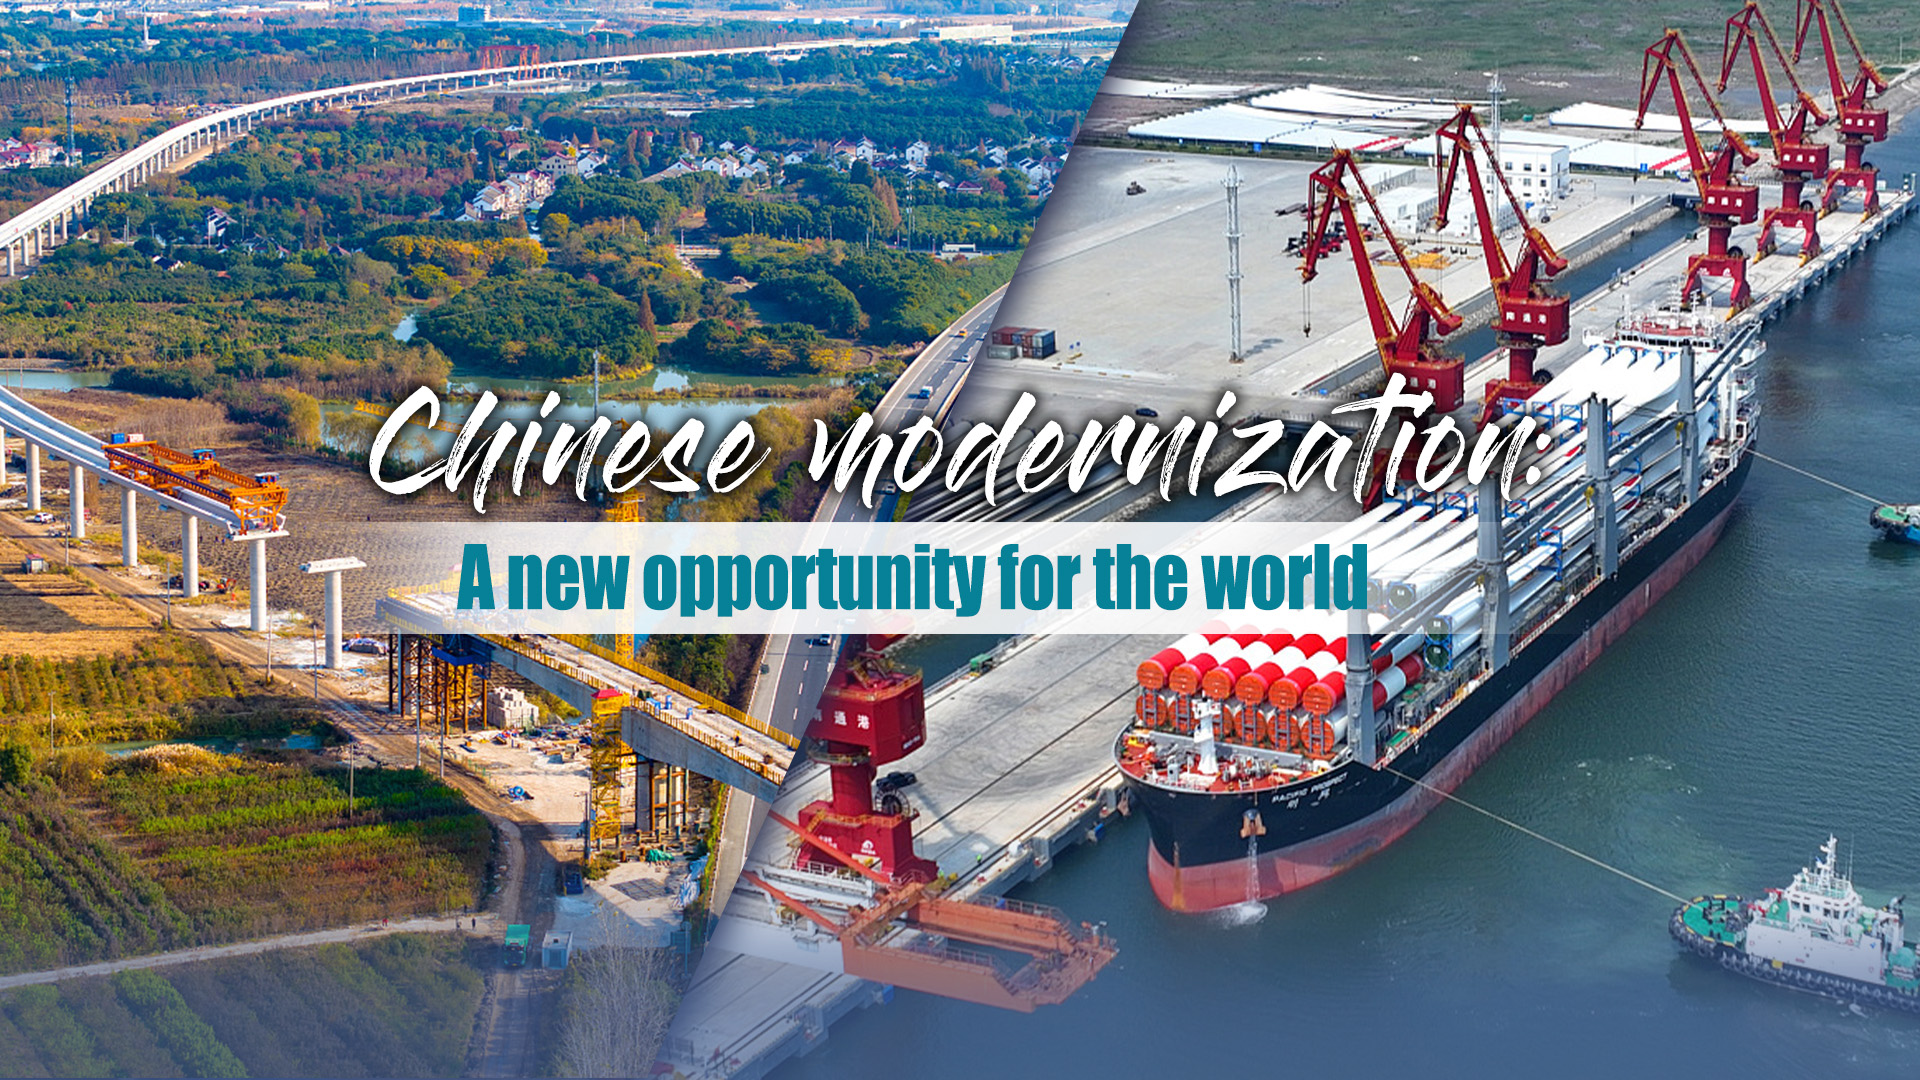 Chinese modernization: A new opportunity for the world